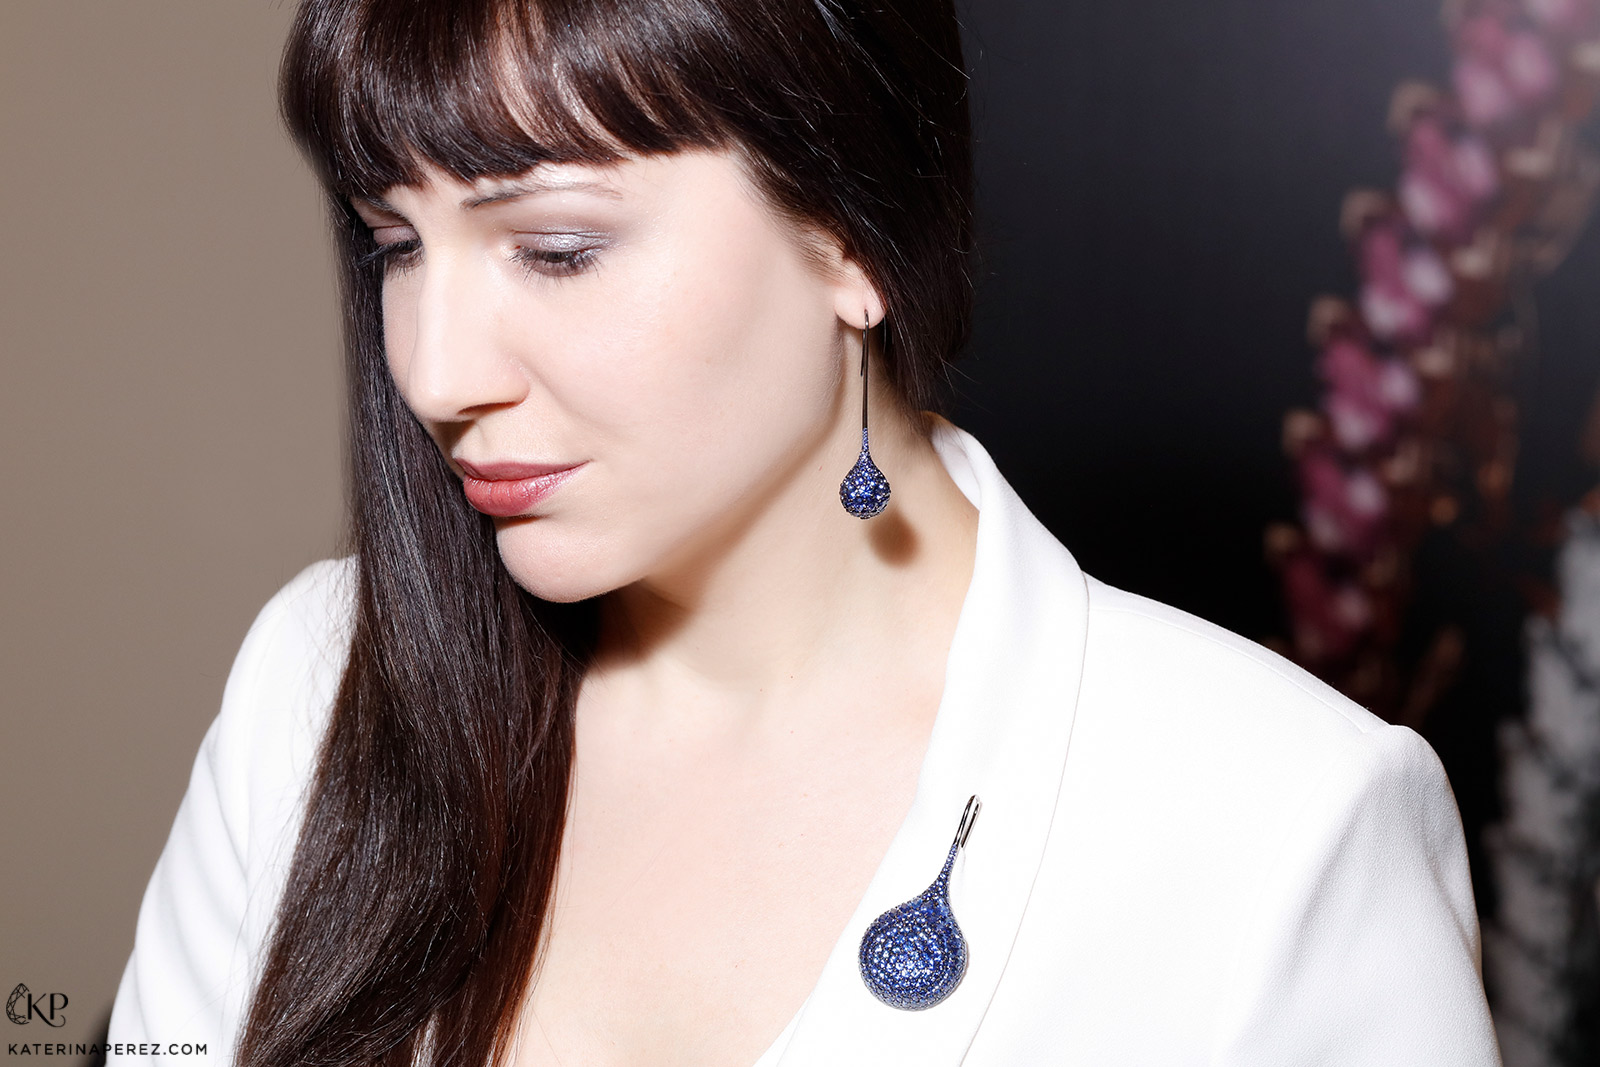 Baenteli earrings and a brooch paved with blue sapphires